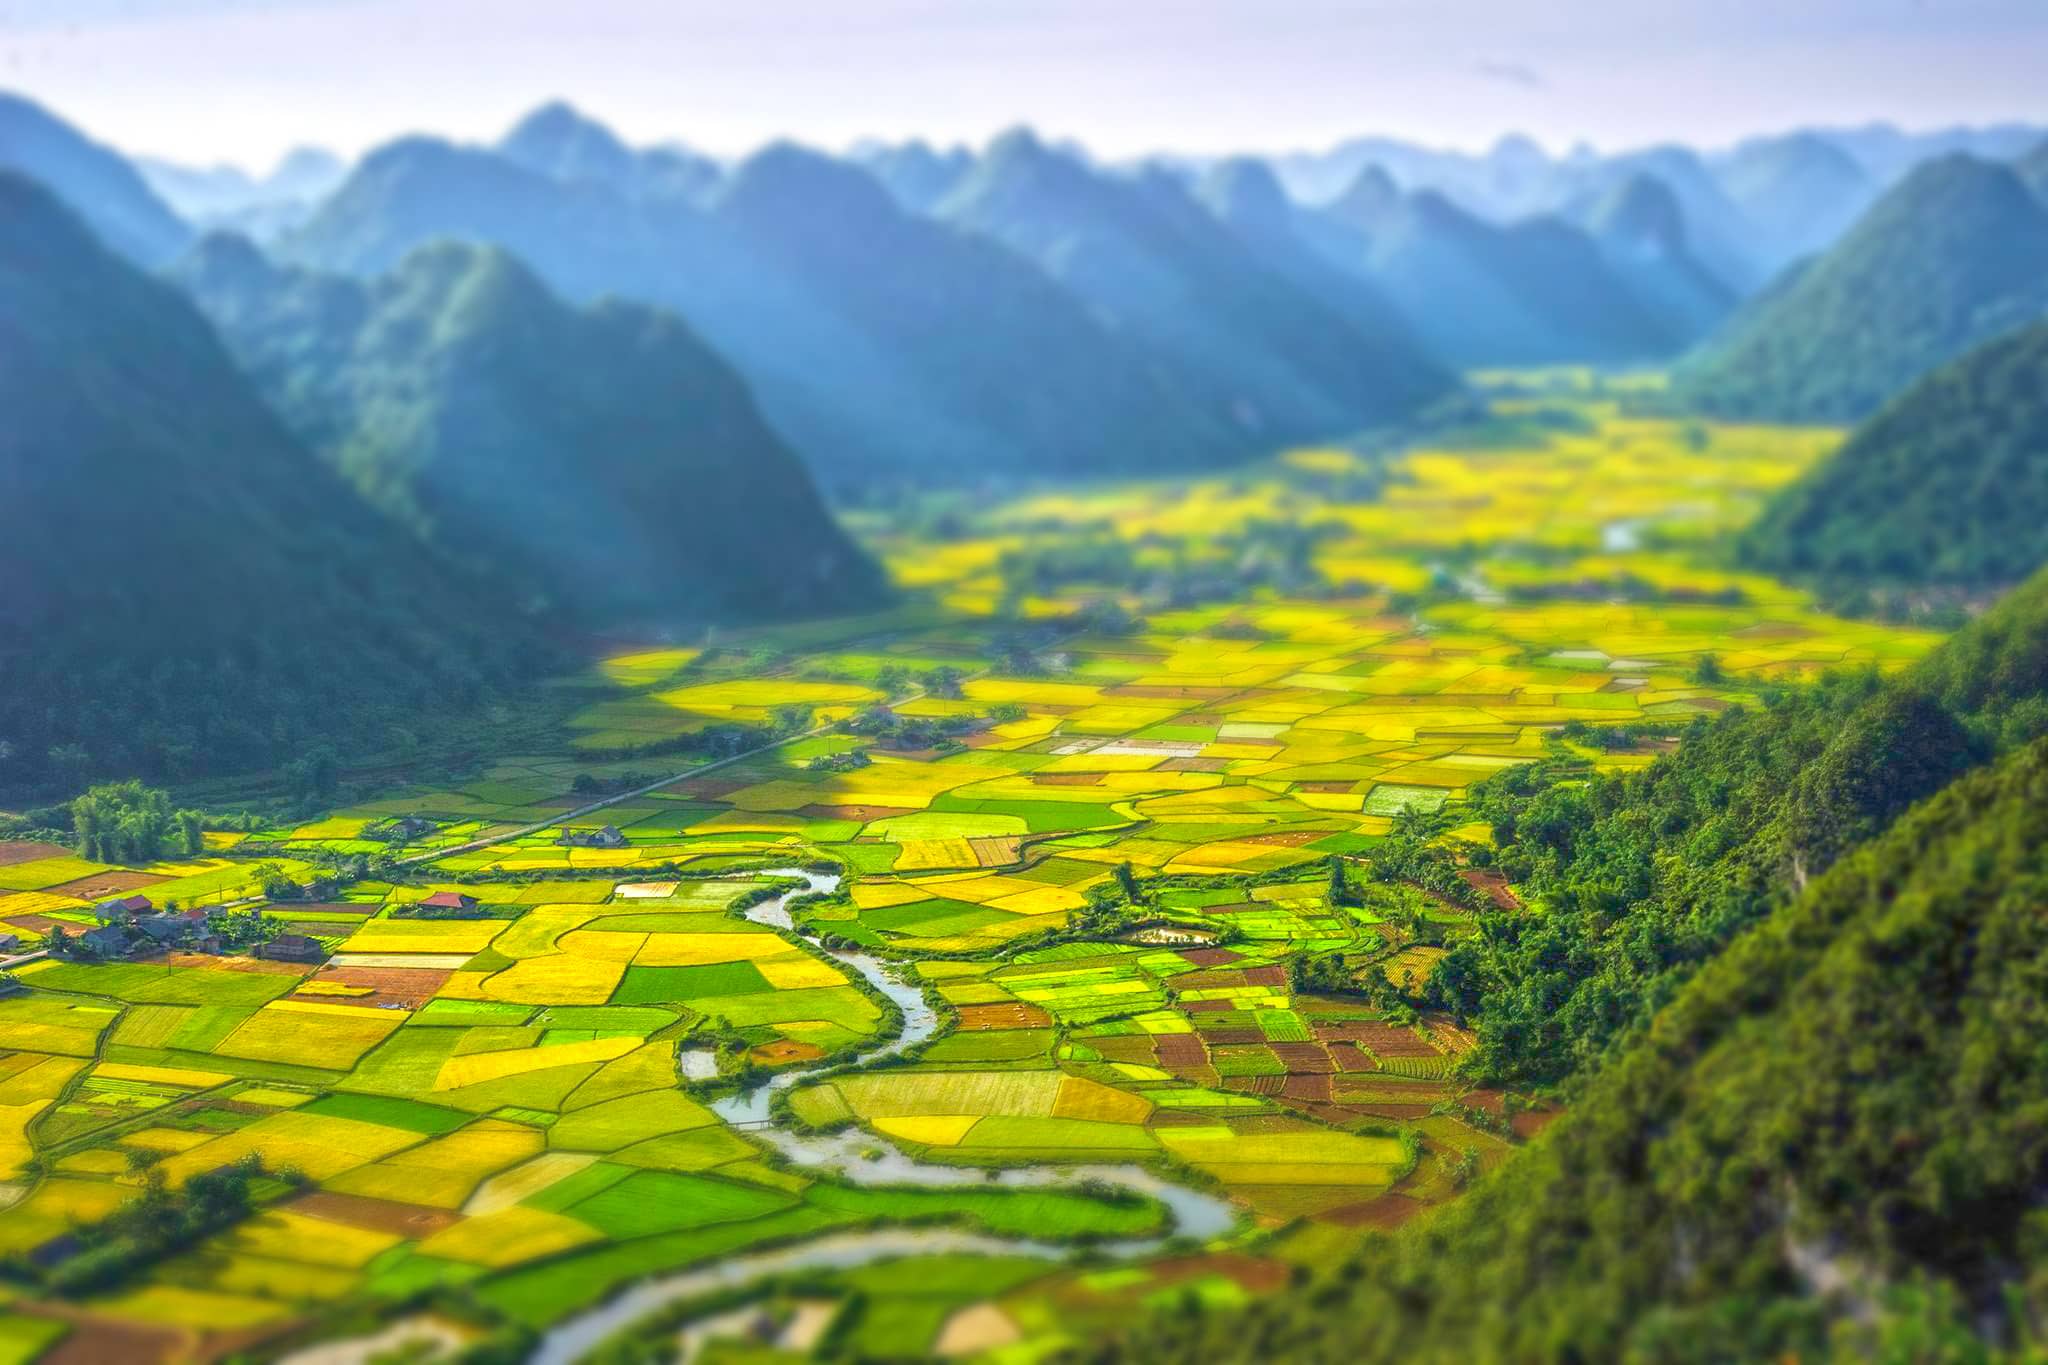 Have you ever dreamed of being surrounded by the beauty and wonder of nature - vietnam vacation package